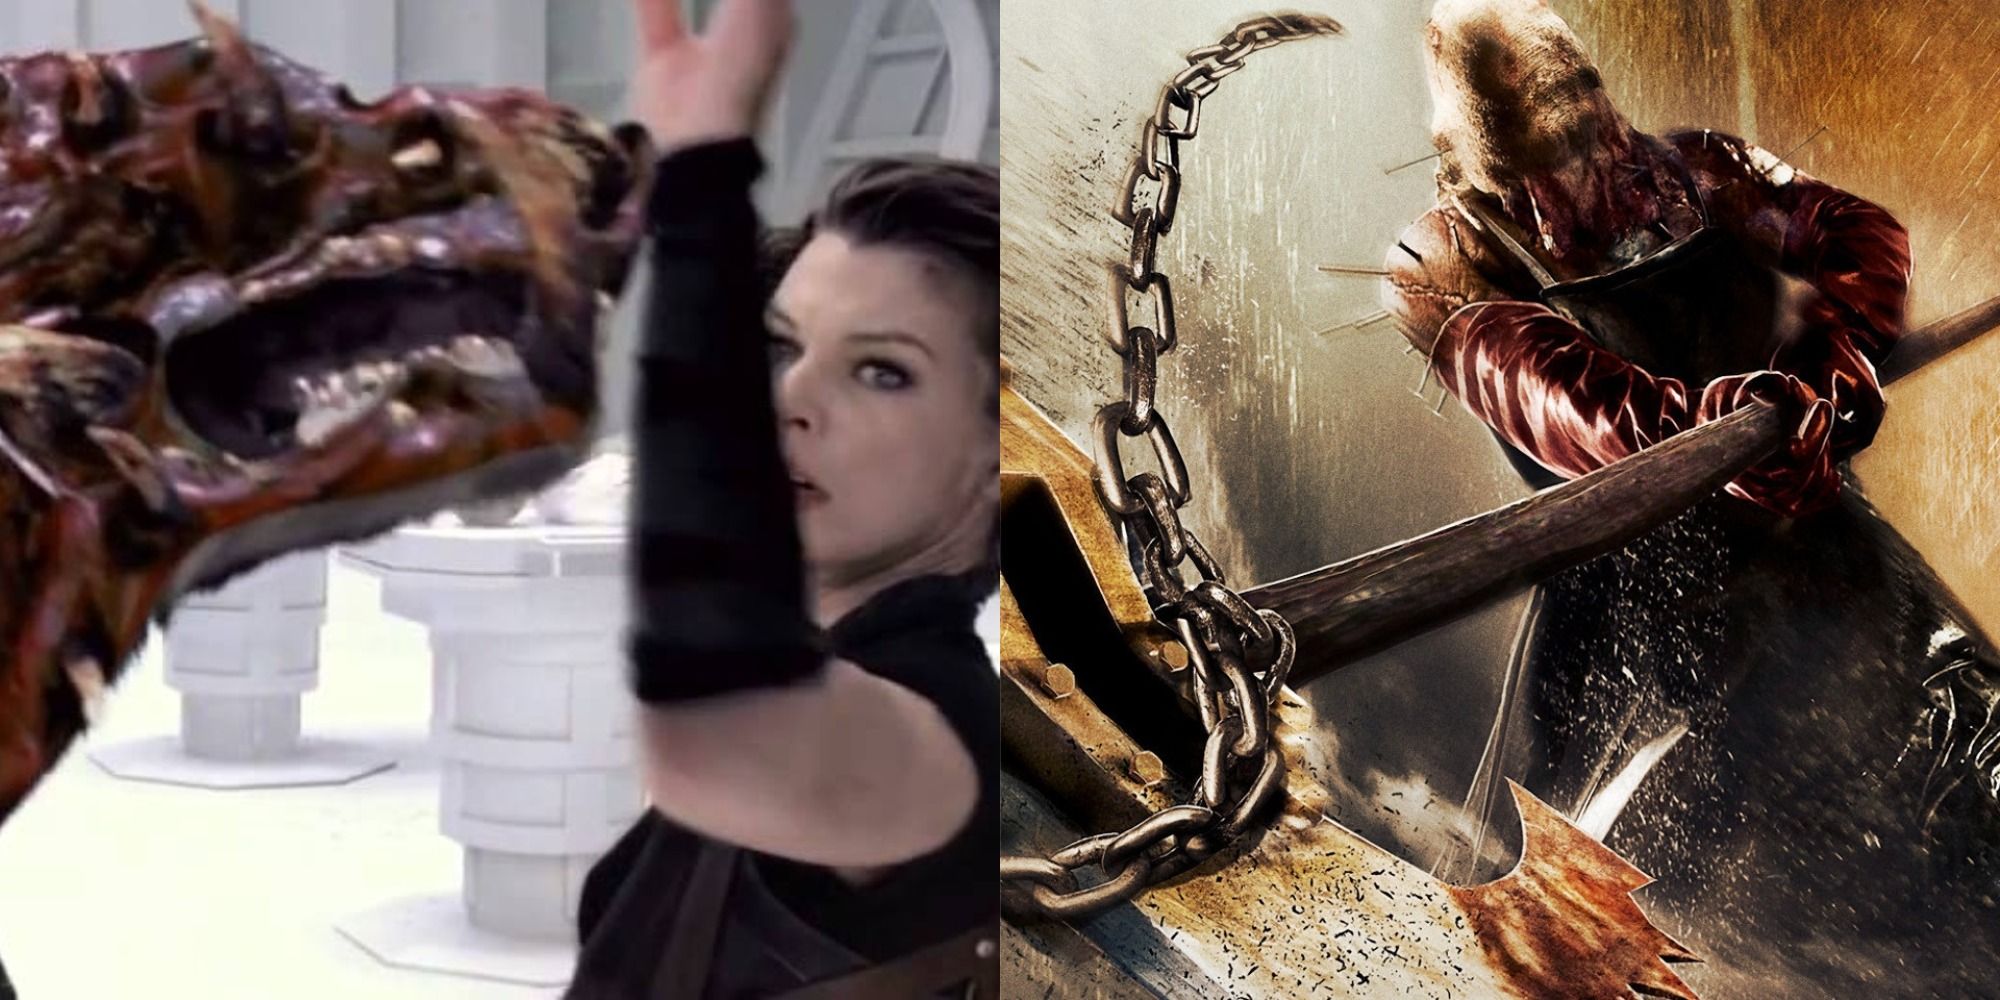 9 Scariest Creatures In The Resident Evil Movie Franchise